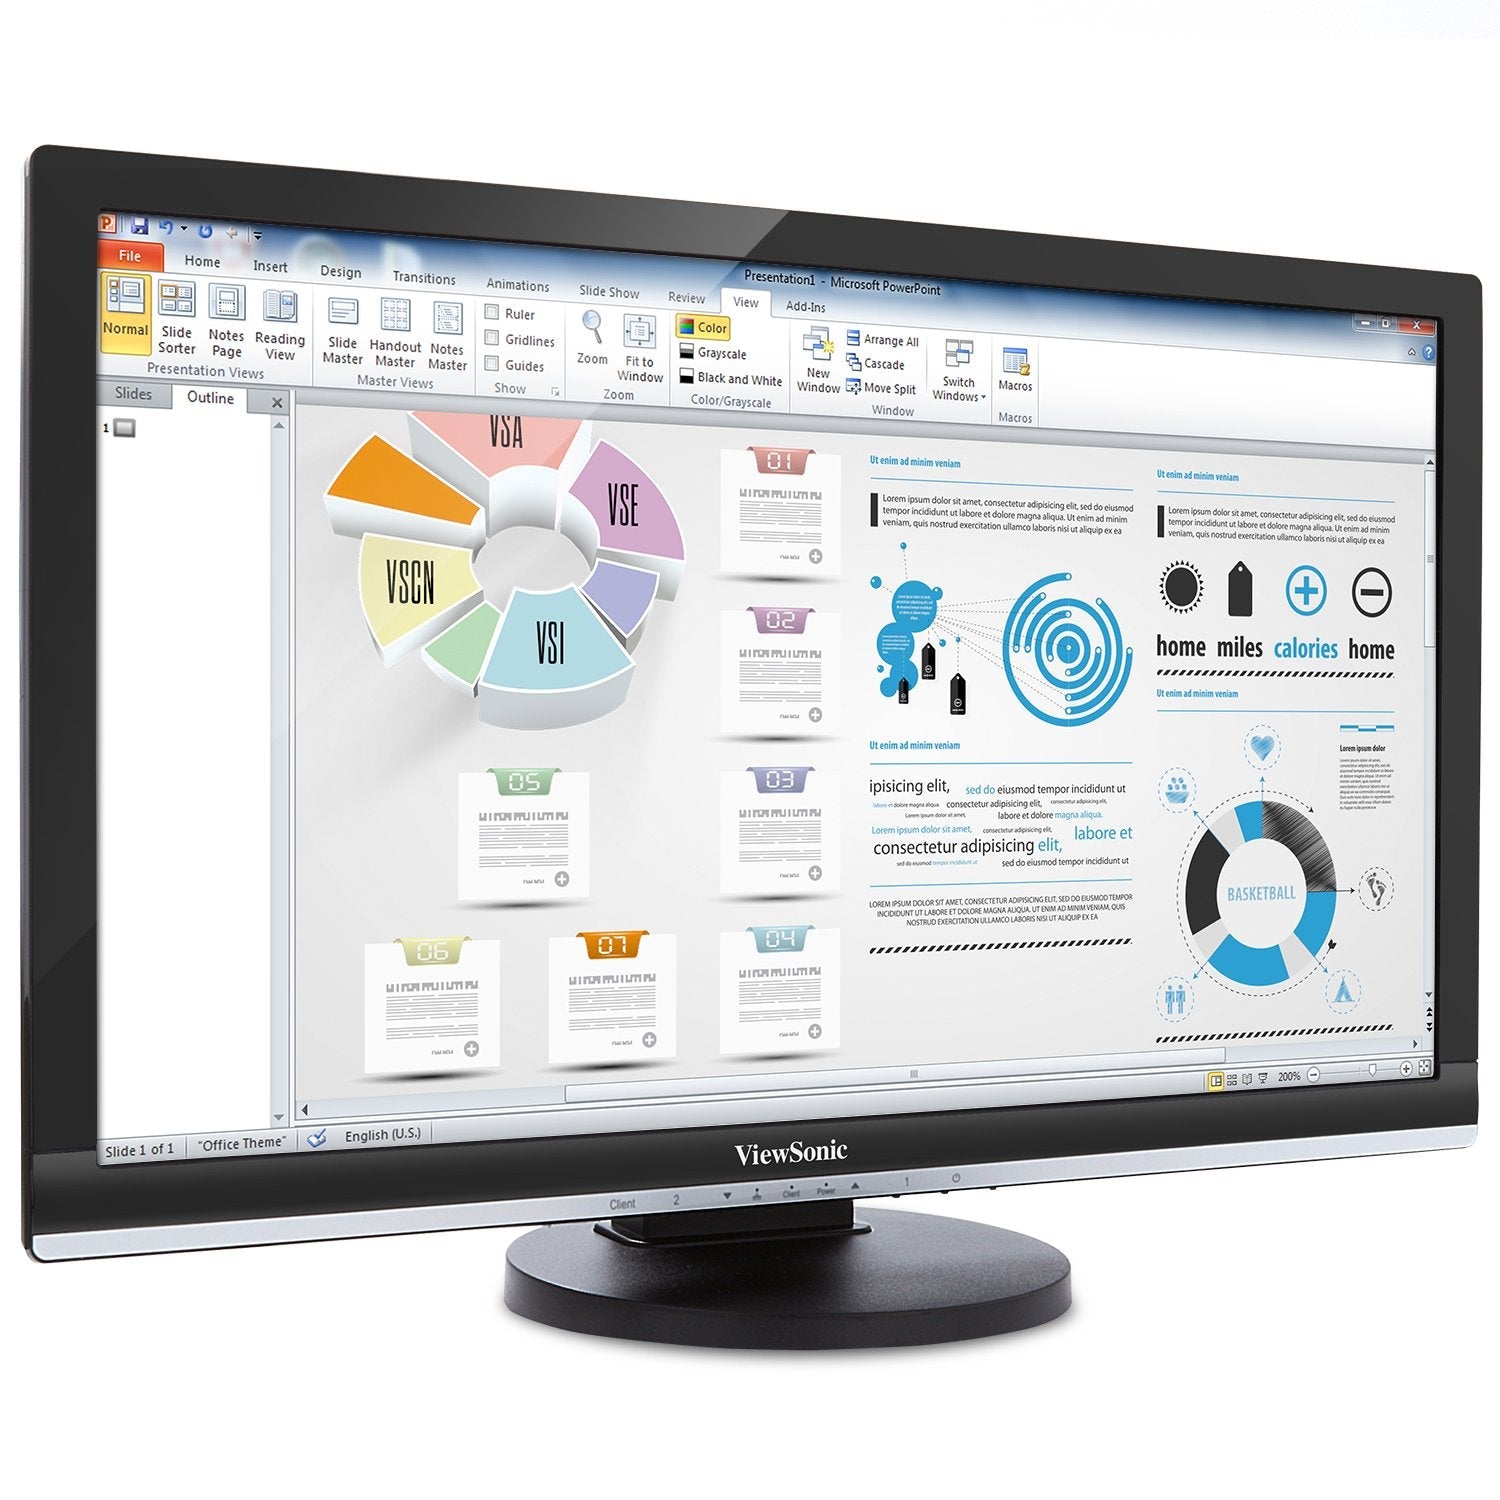 ViewSonic SD-T245_BK_US0-R 24" Thin Integrated Client Monitor - Certified Refurbished